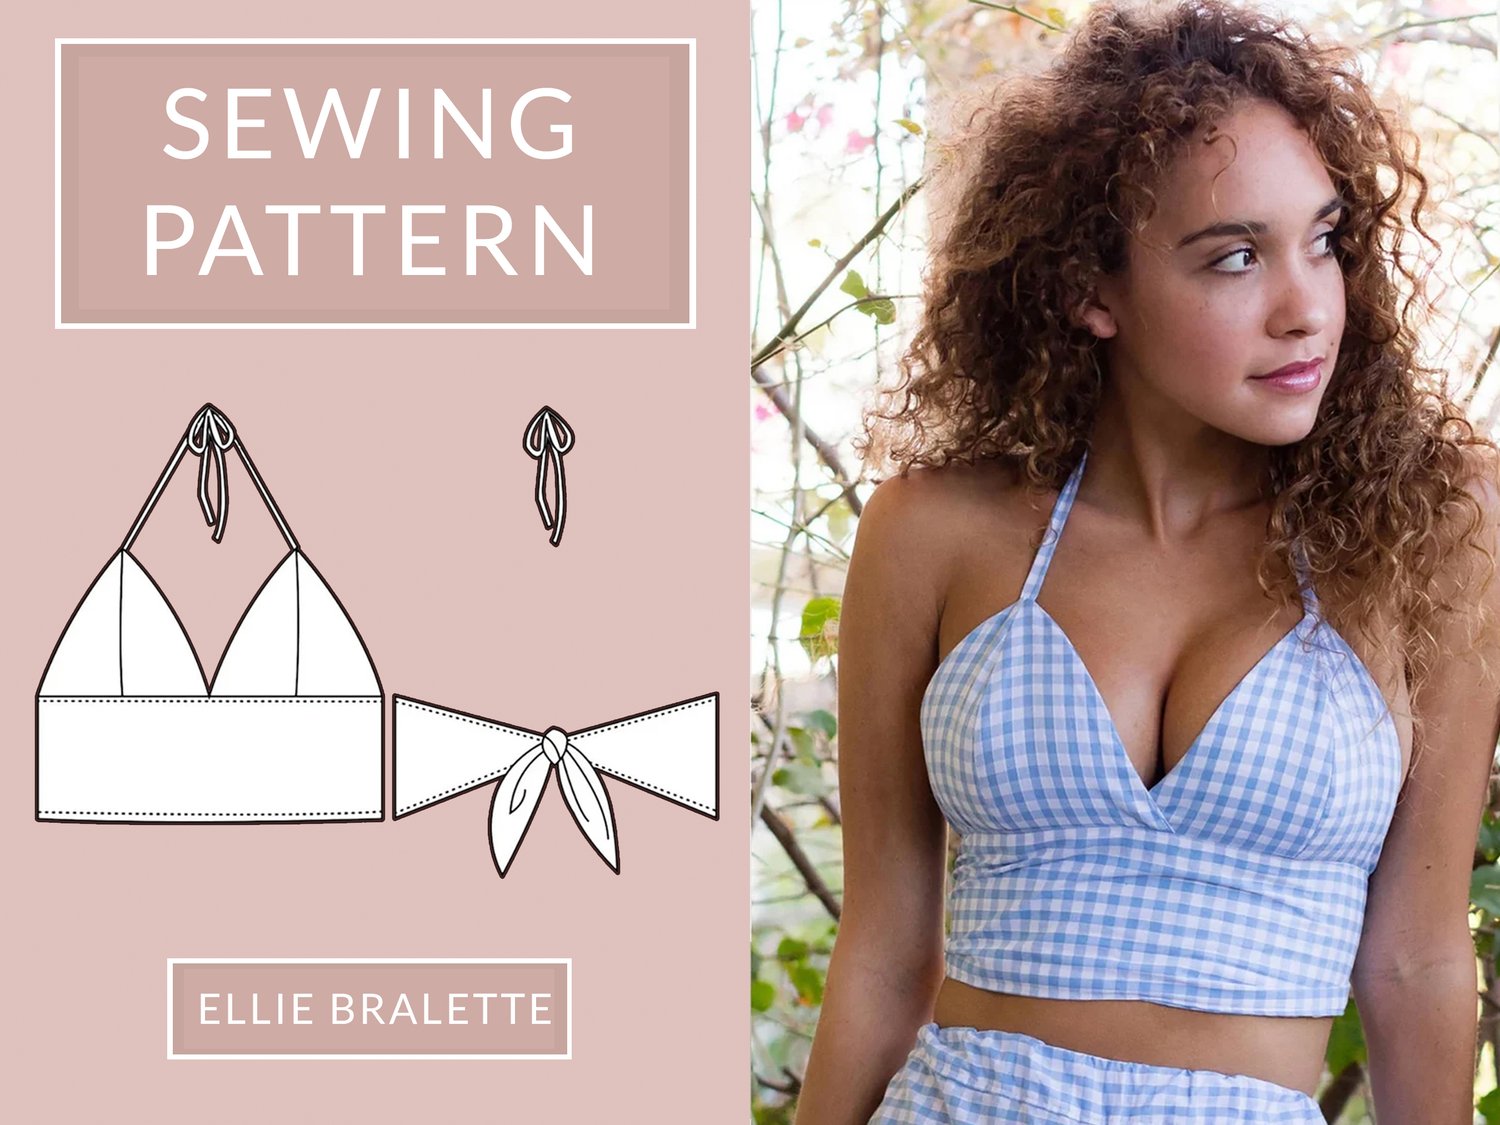 Bralette sewing pattern step-by-step and sewing instruction